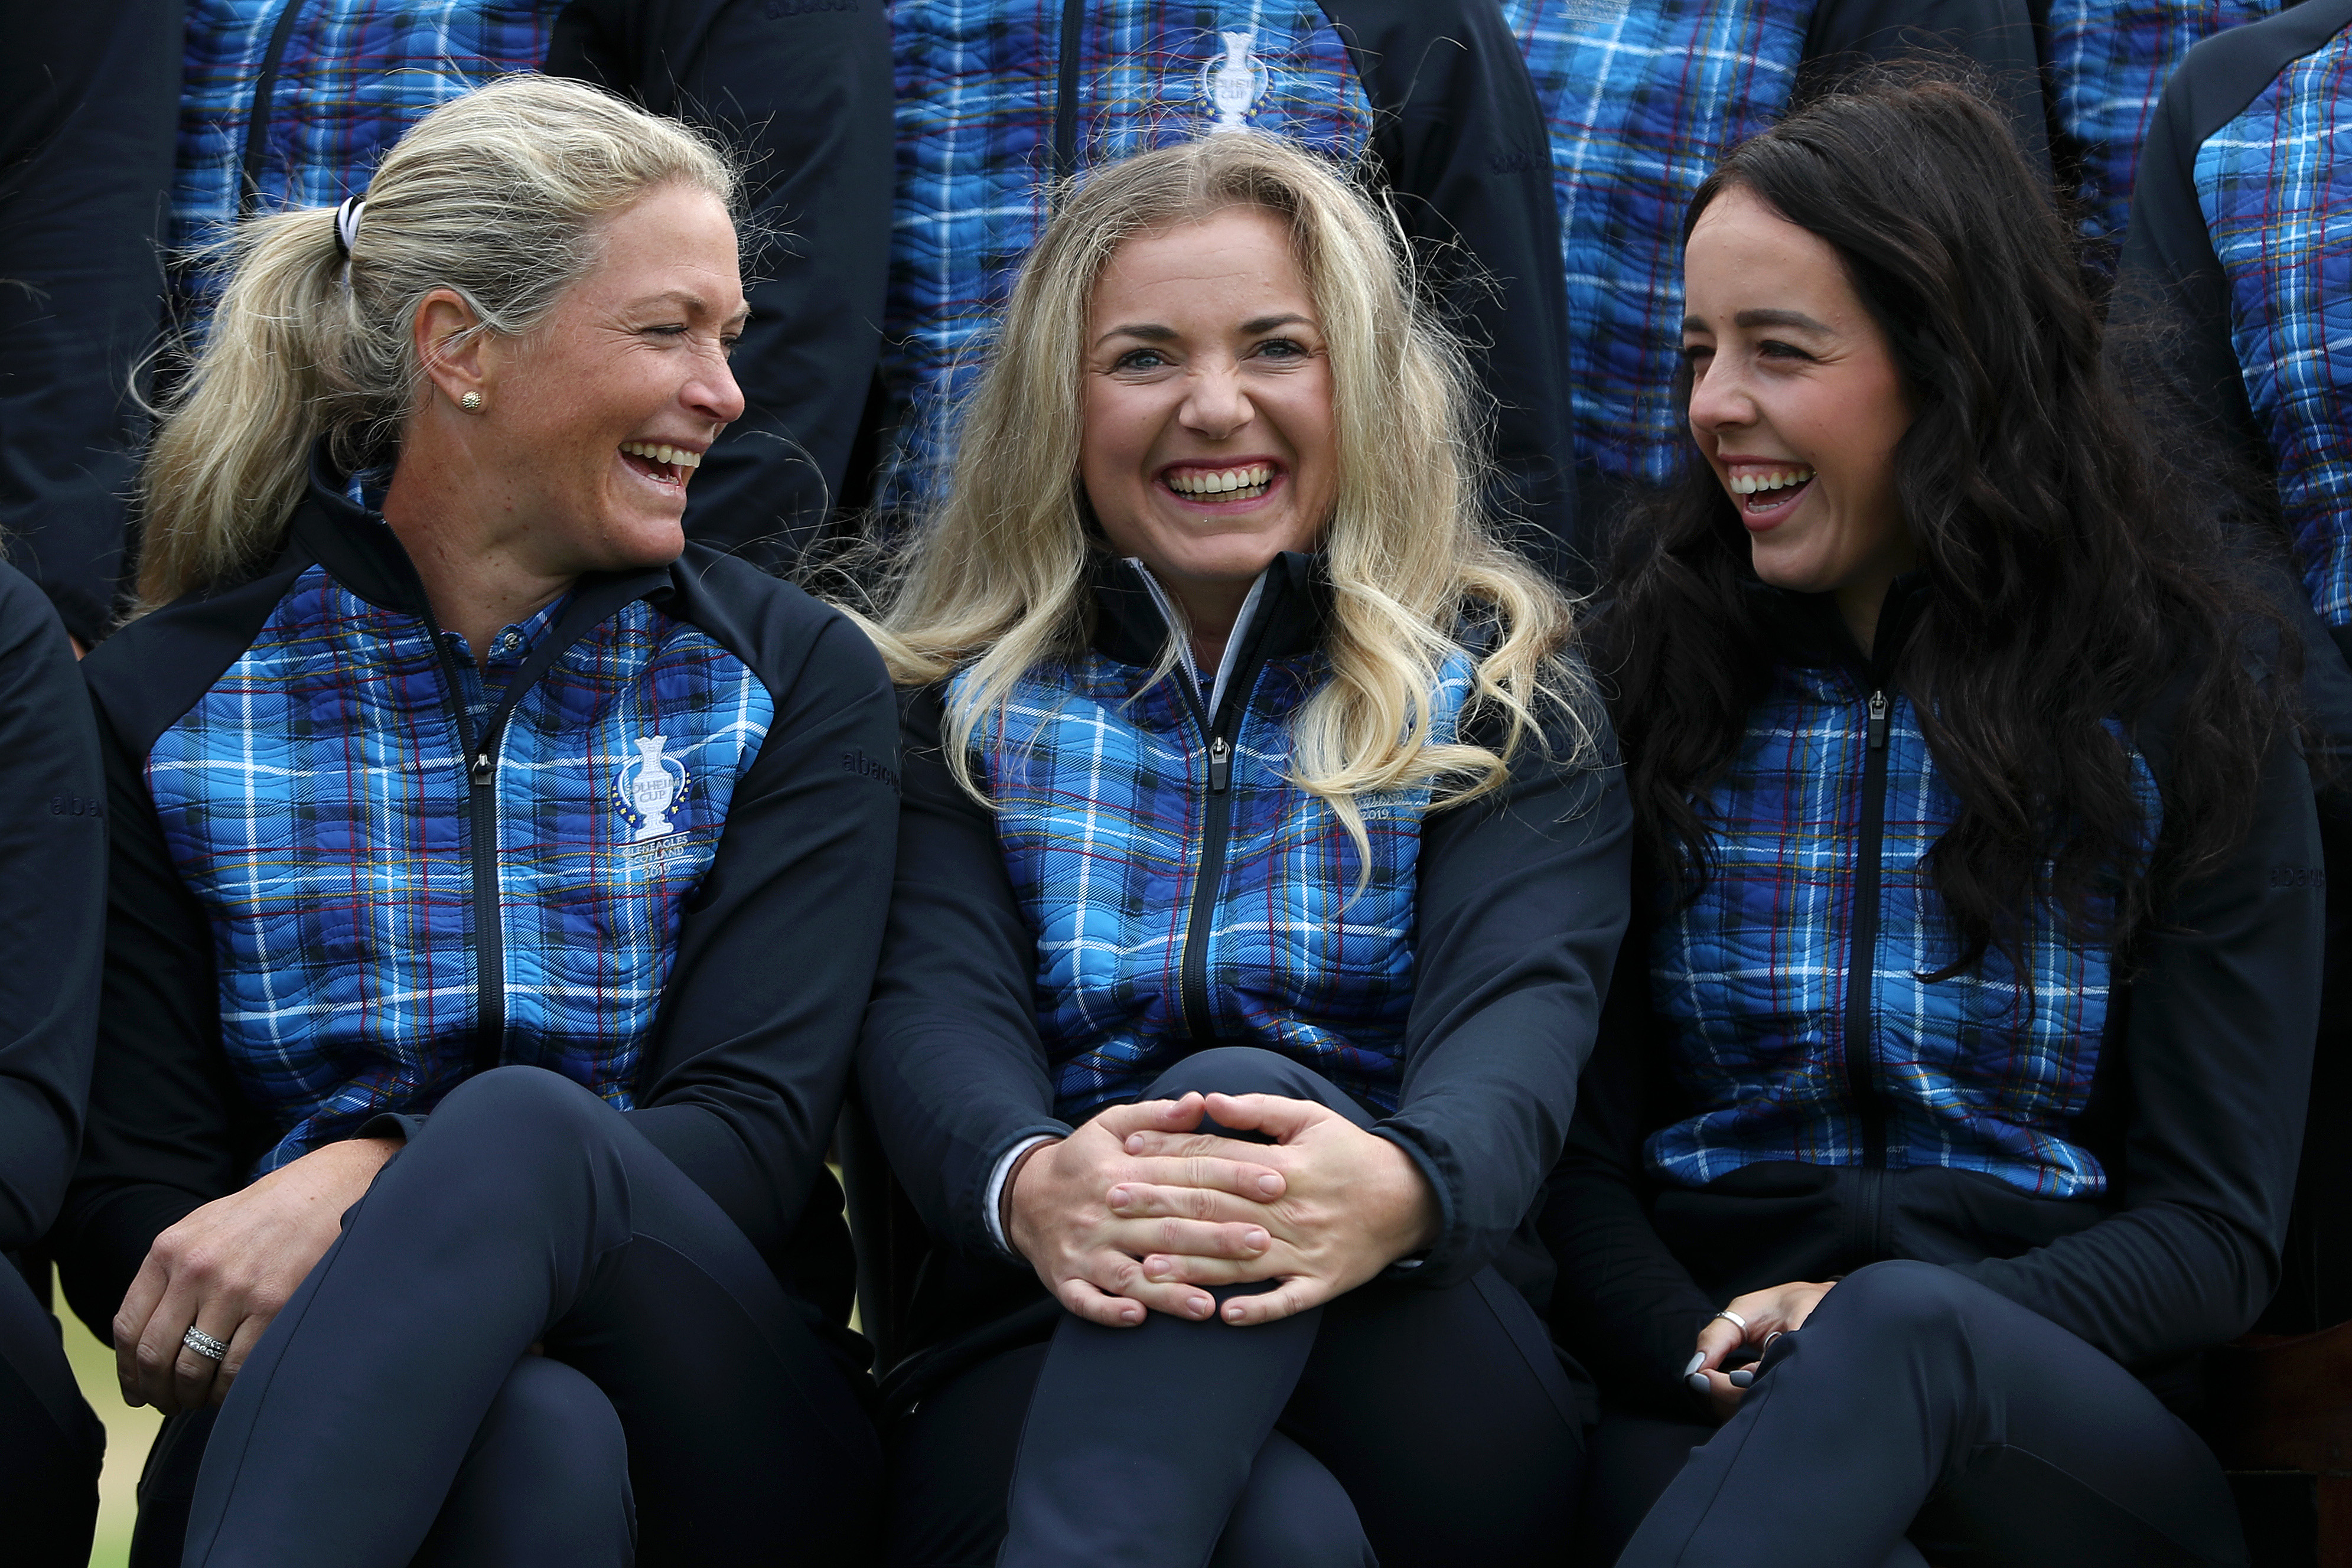 Suzann Pettersen, Bronte Law and Georgia Hall are likely to be key players for Europe in the Solheim Cup.